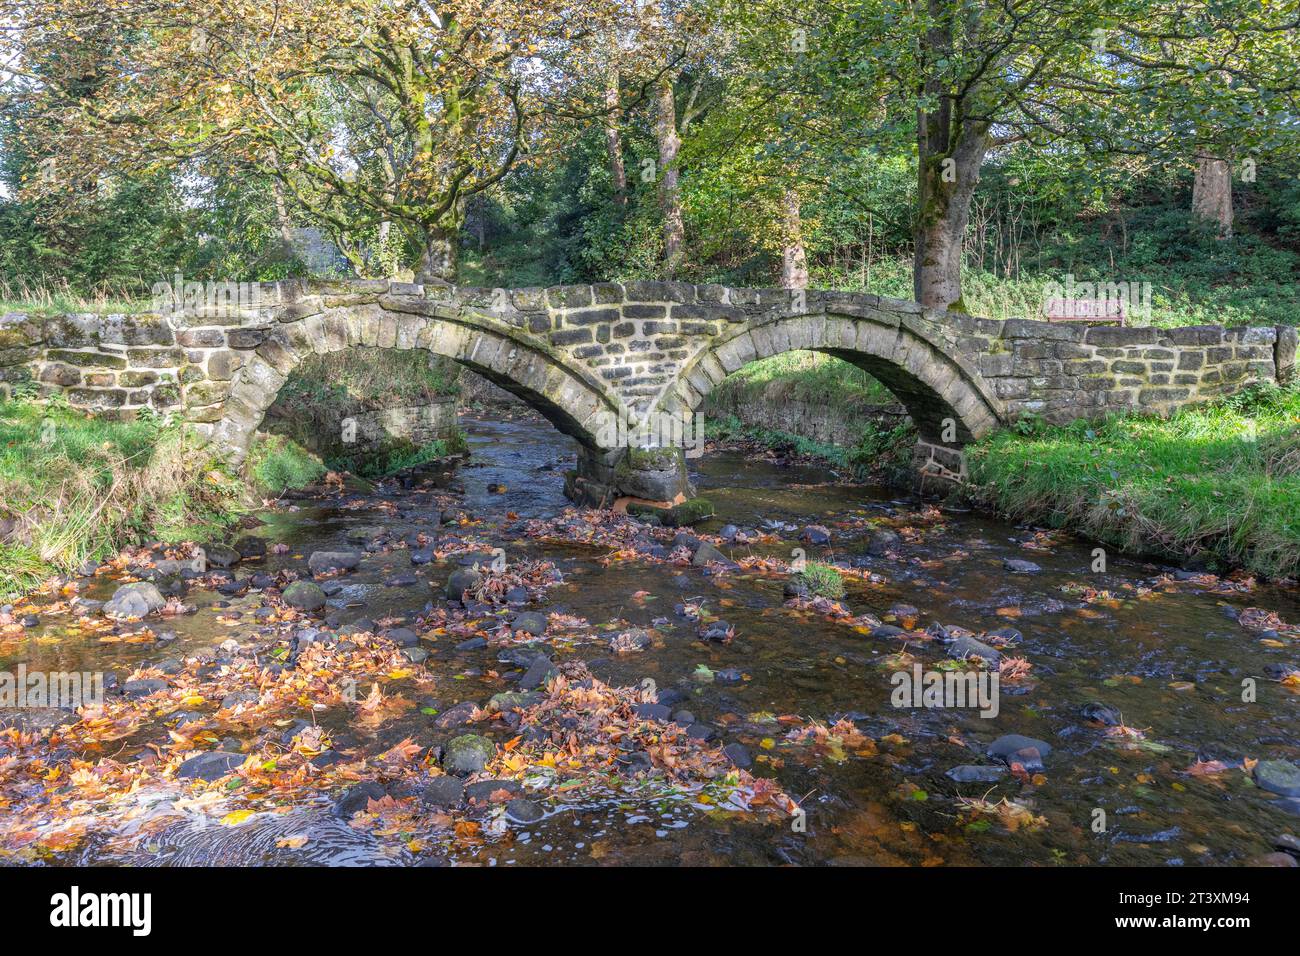 The famous pack-horse bridge is a two-arched structure spanning Wycoller beck. It is sometimes called Sally’s Bridge after one of the Cunliffe family Stock Photo